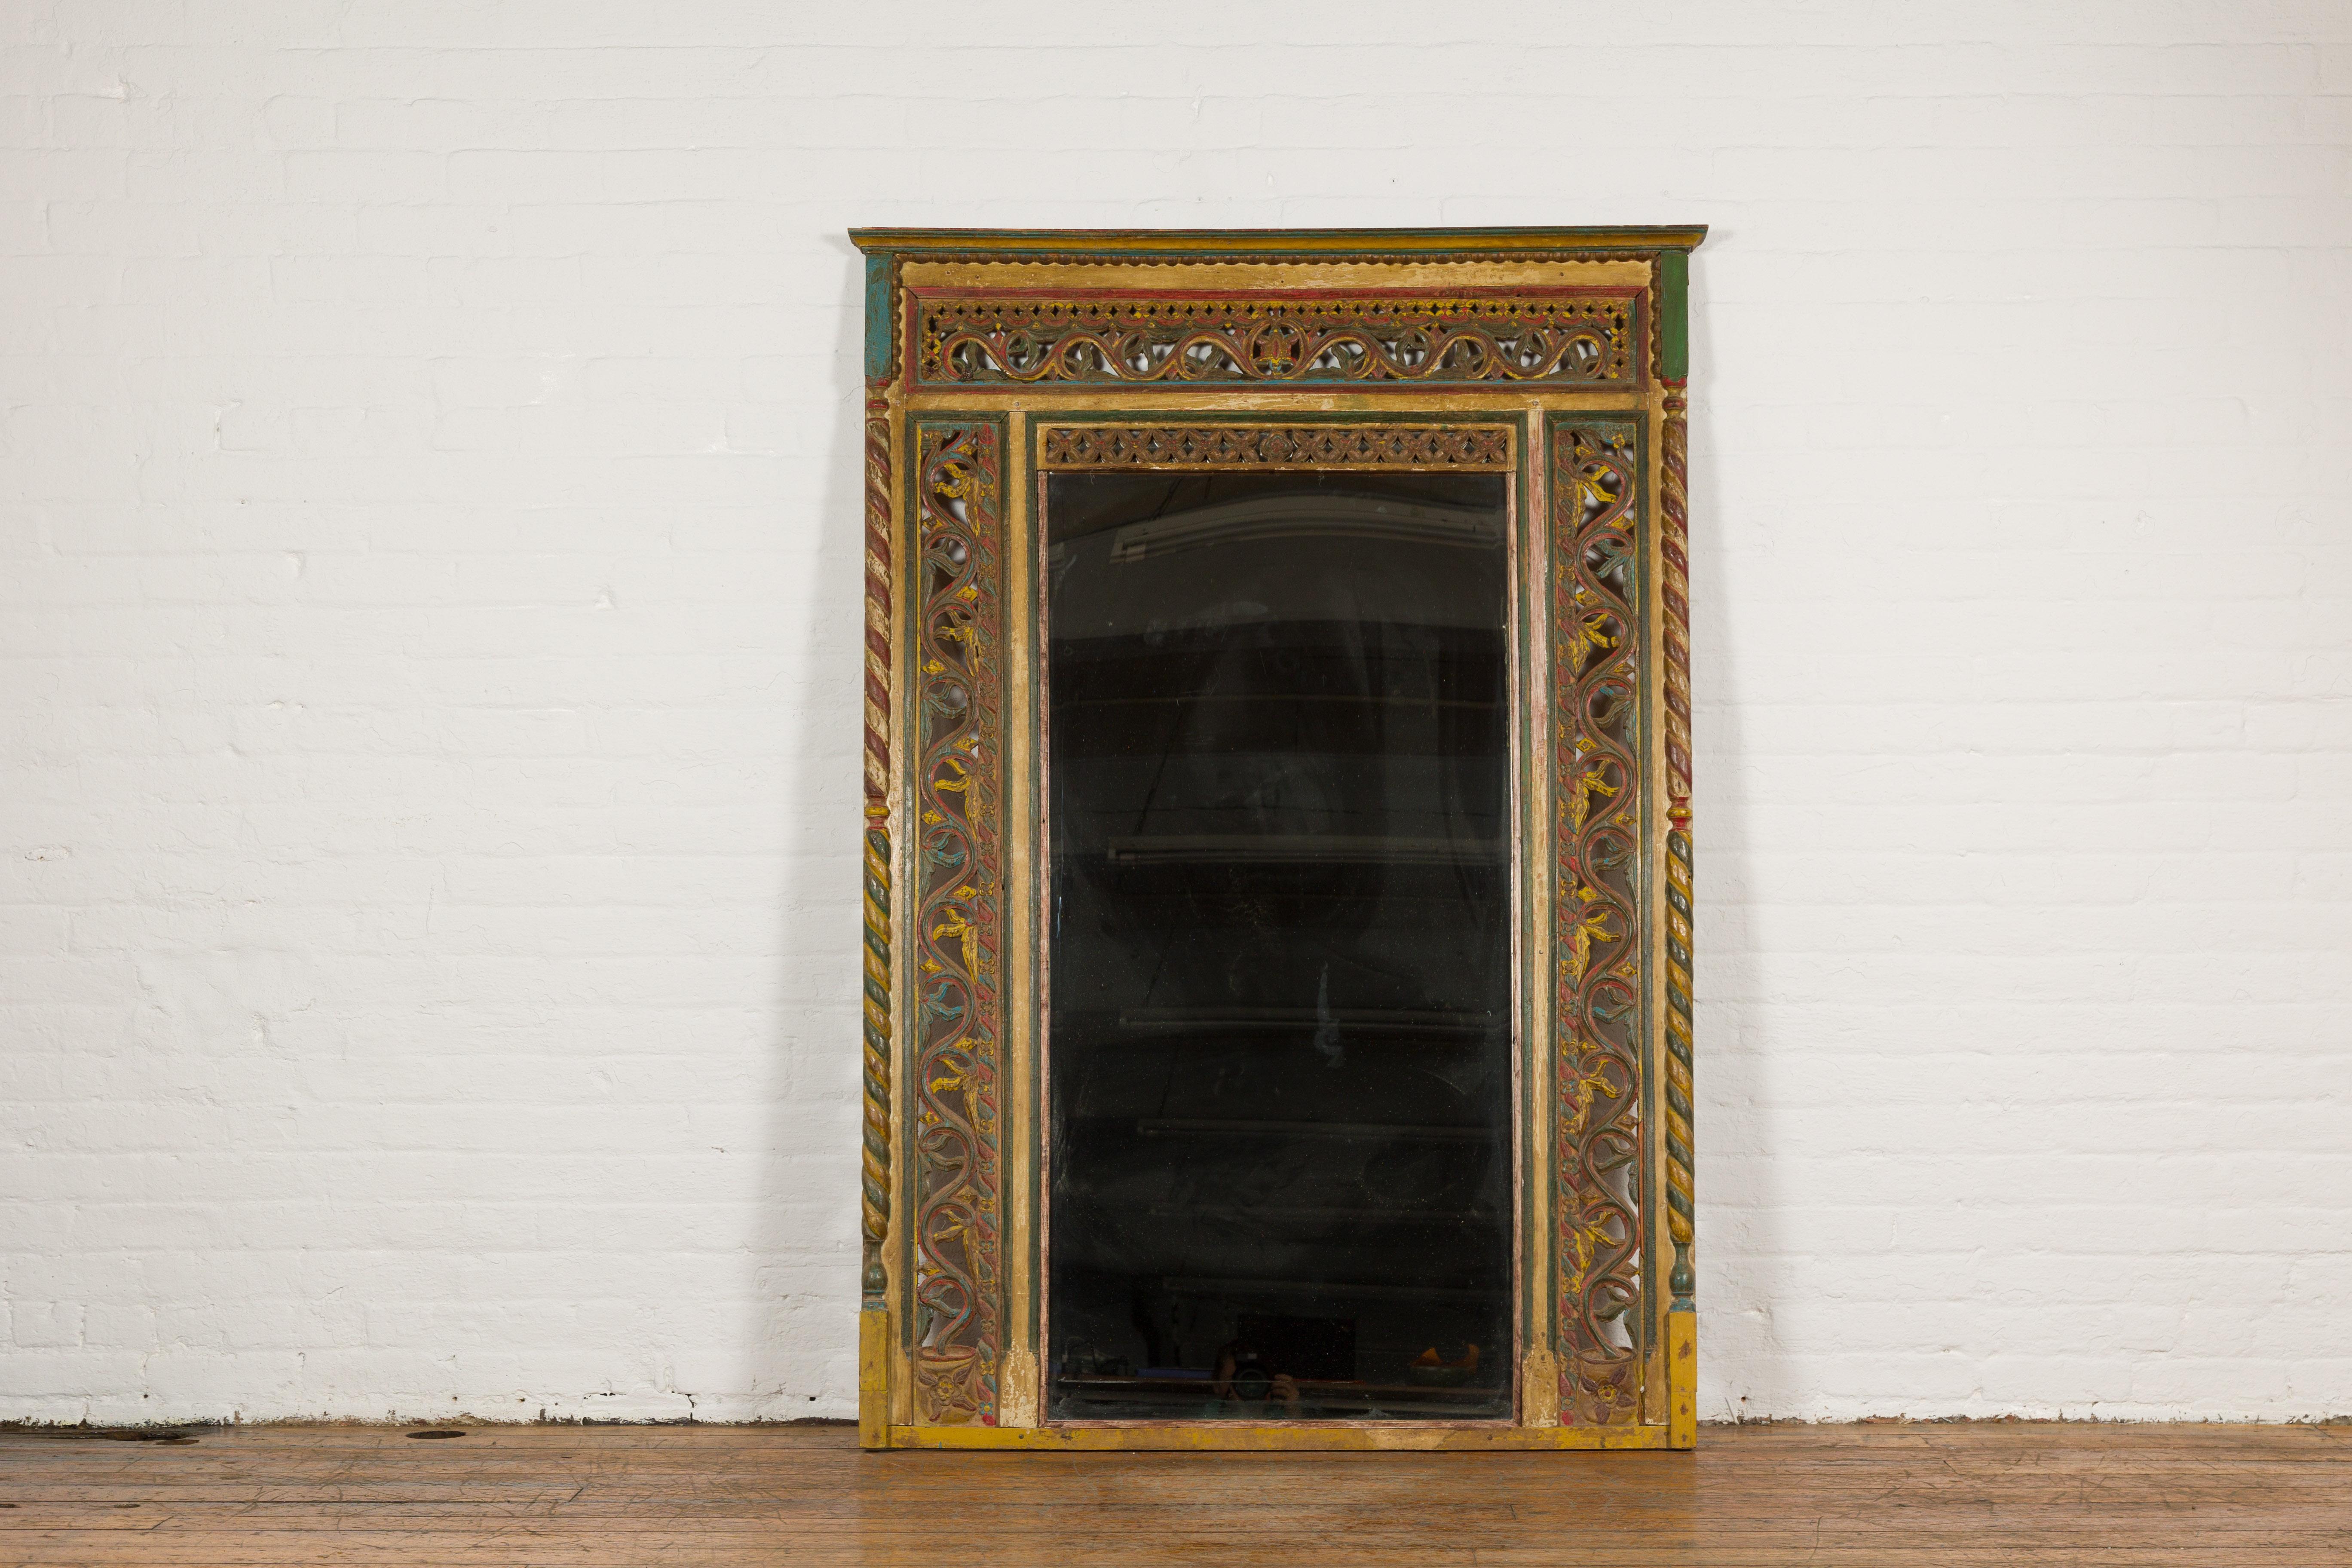 An antique Indian richly carved green, red and yellow painted window made into a trumeau mirror. Introducing a resplendent Indian trumeau mirror, masterfully repurposed from a beautifully carved and brightly painted window. This striking piece